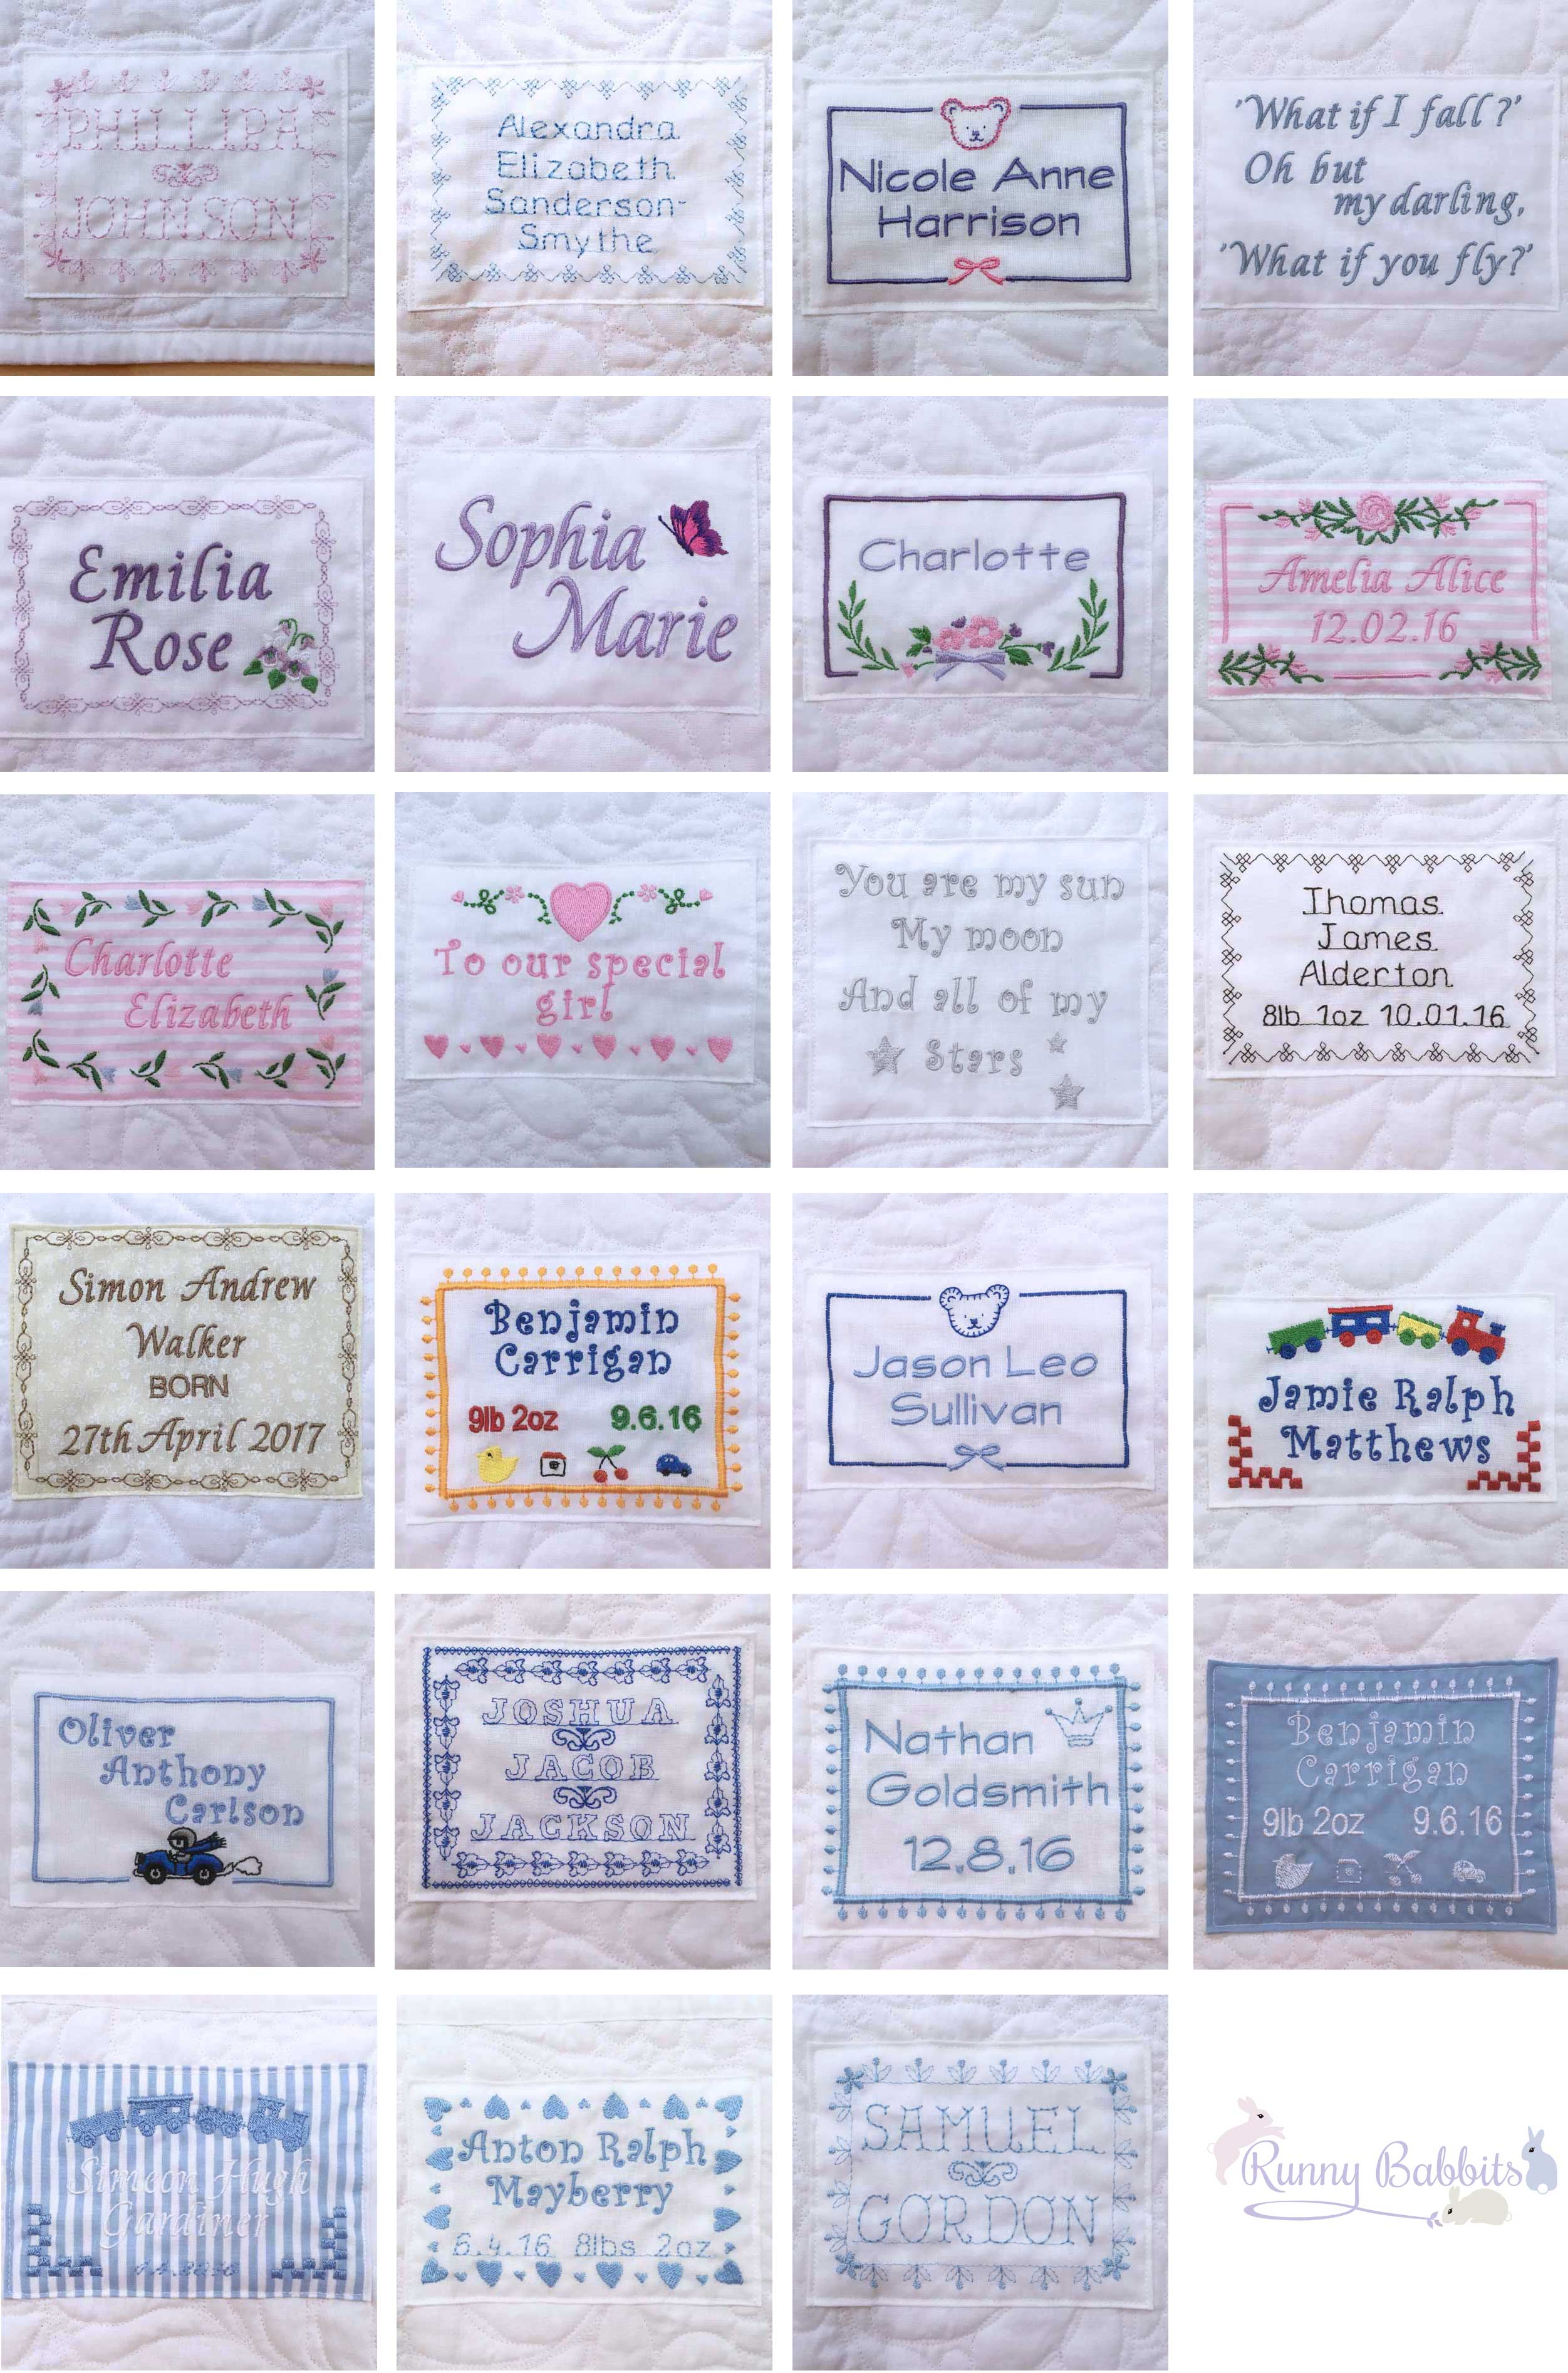 Runny Babbits personalised label options